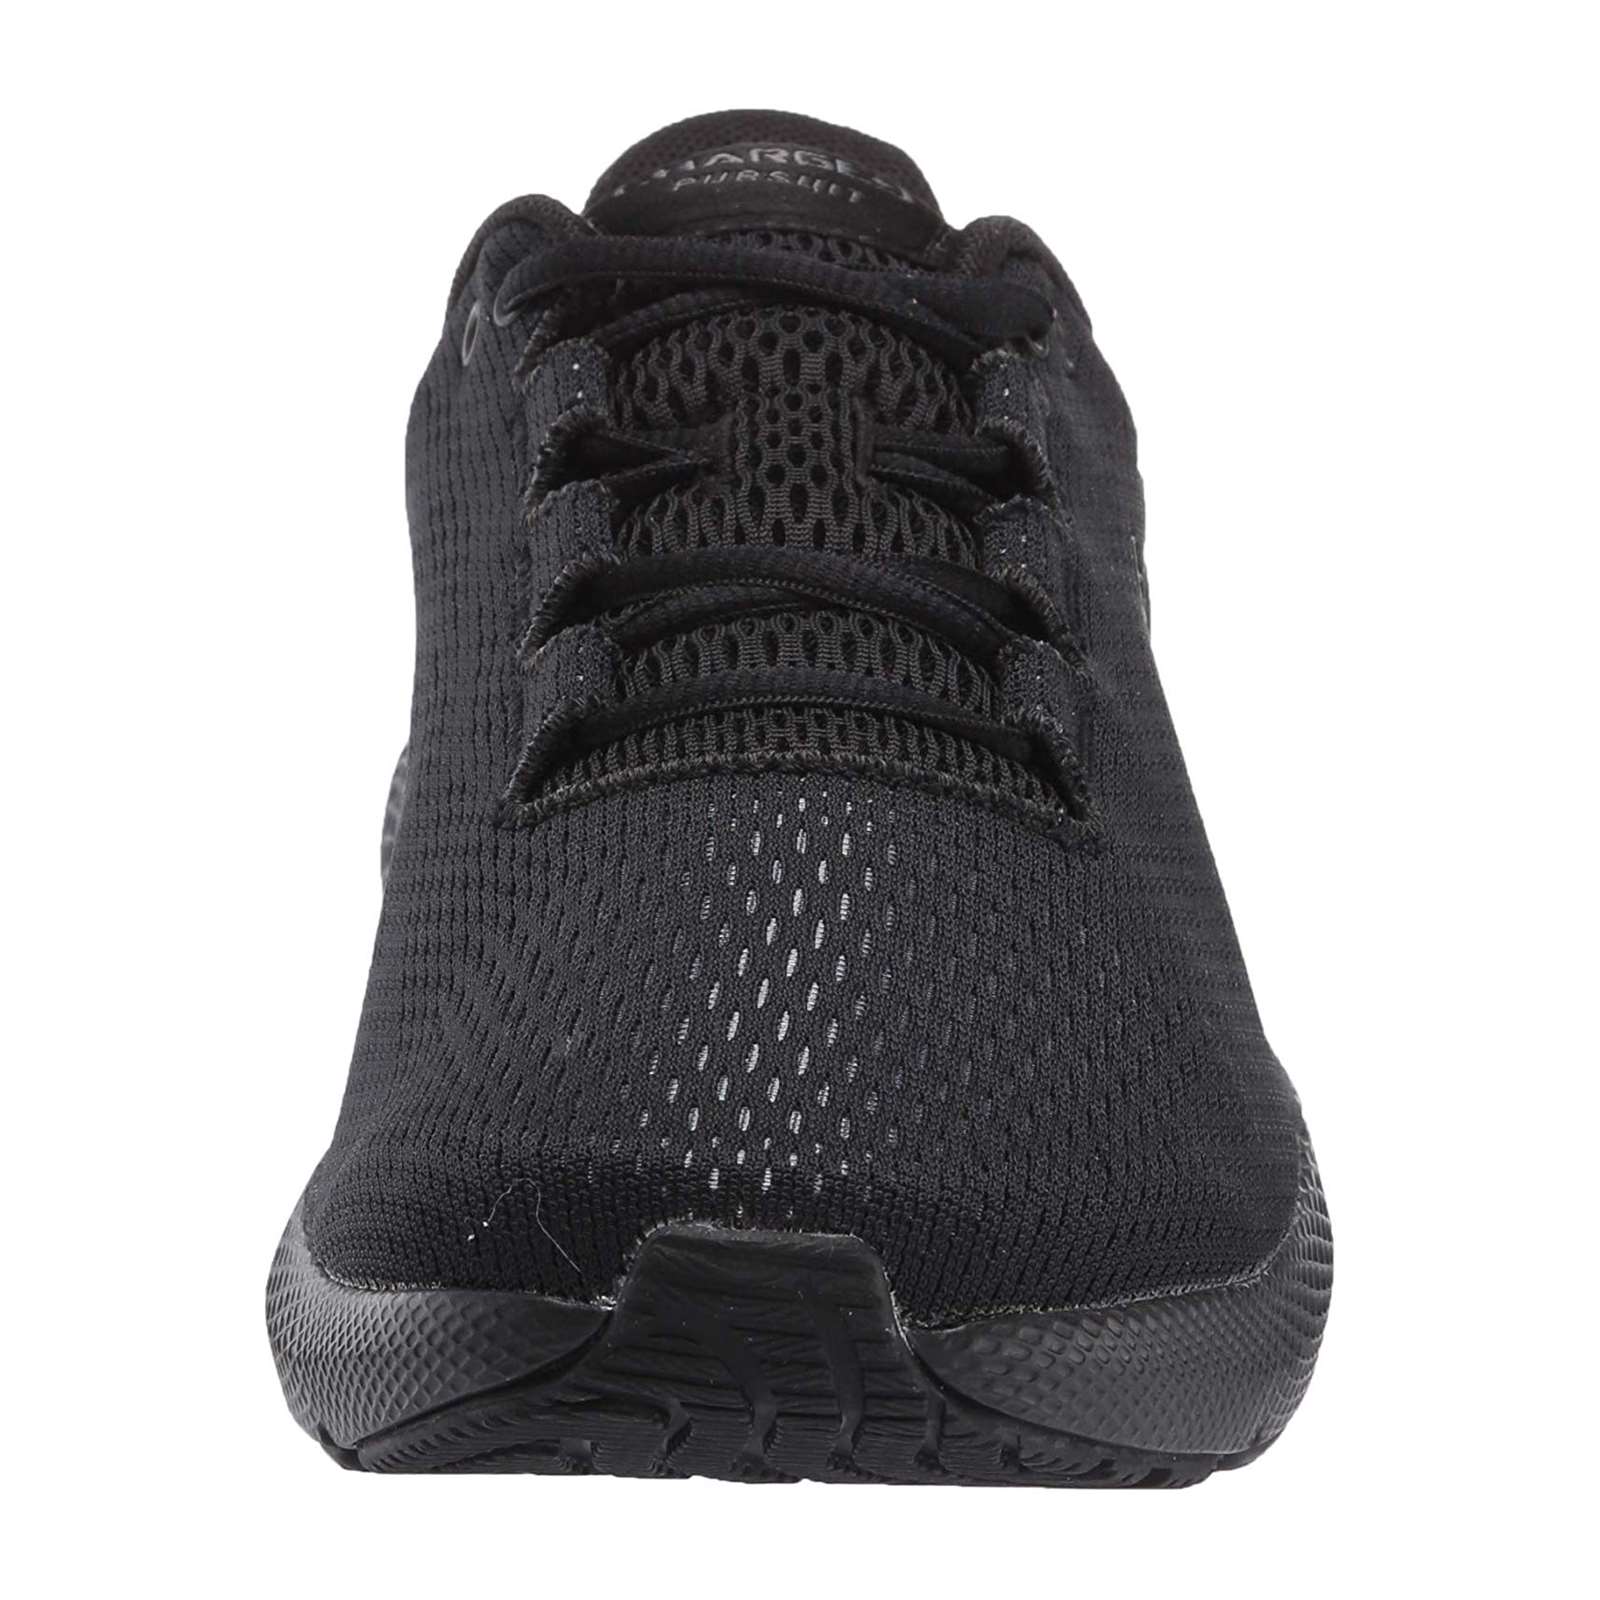 Under Armour Men Charged Pursuit 2 Running Shoes